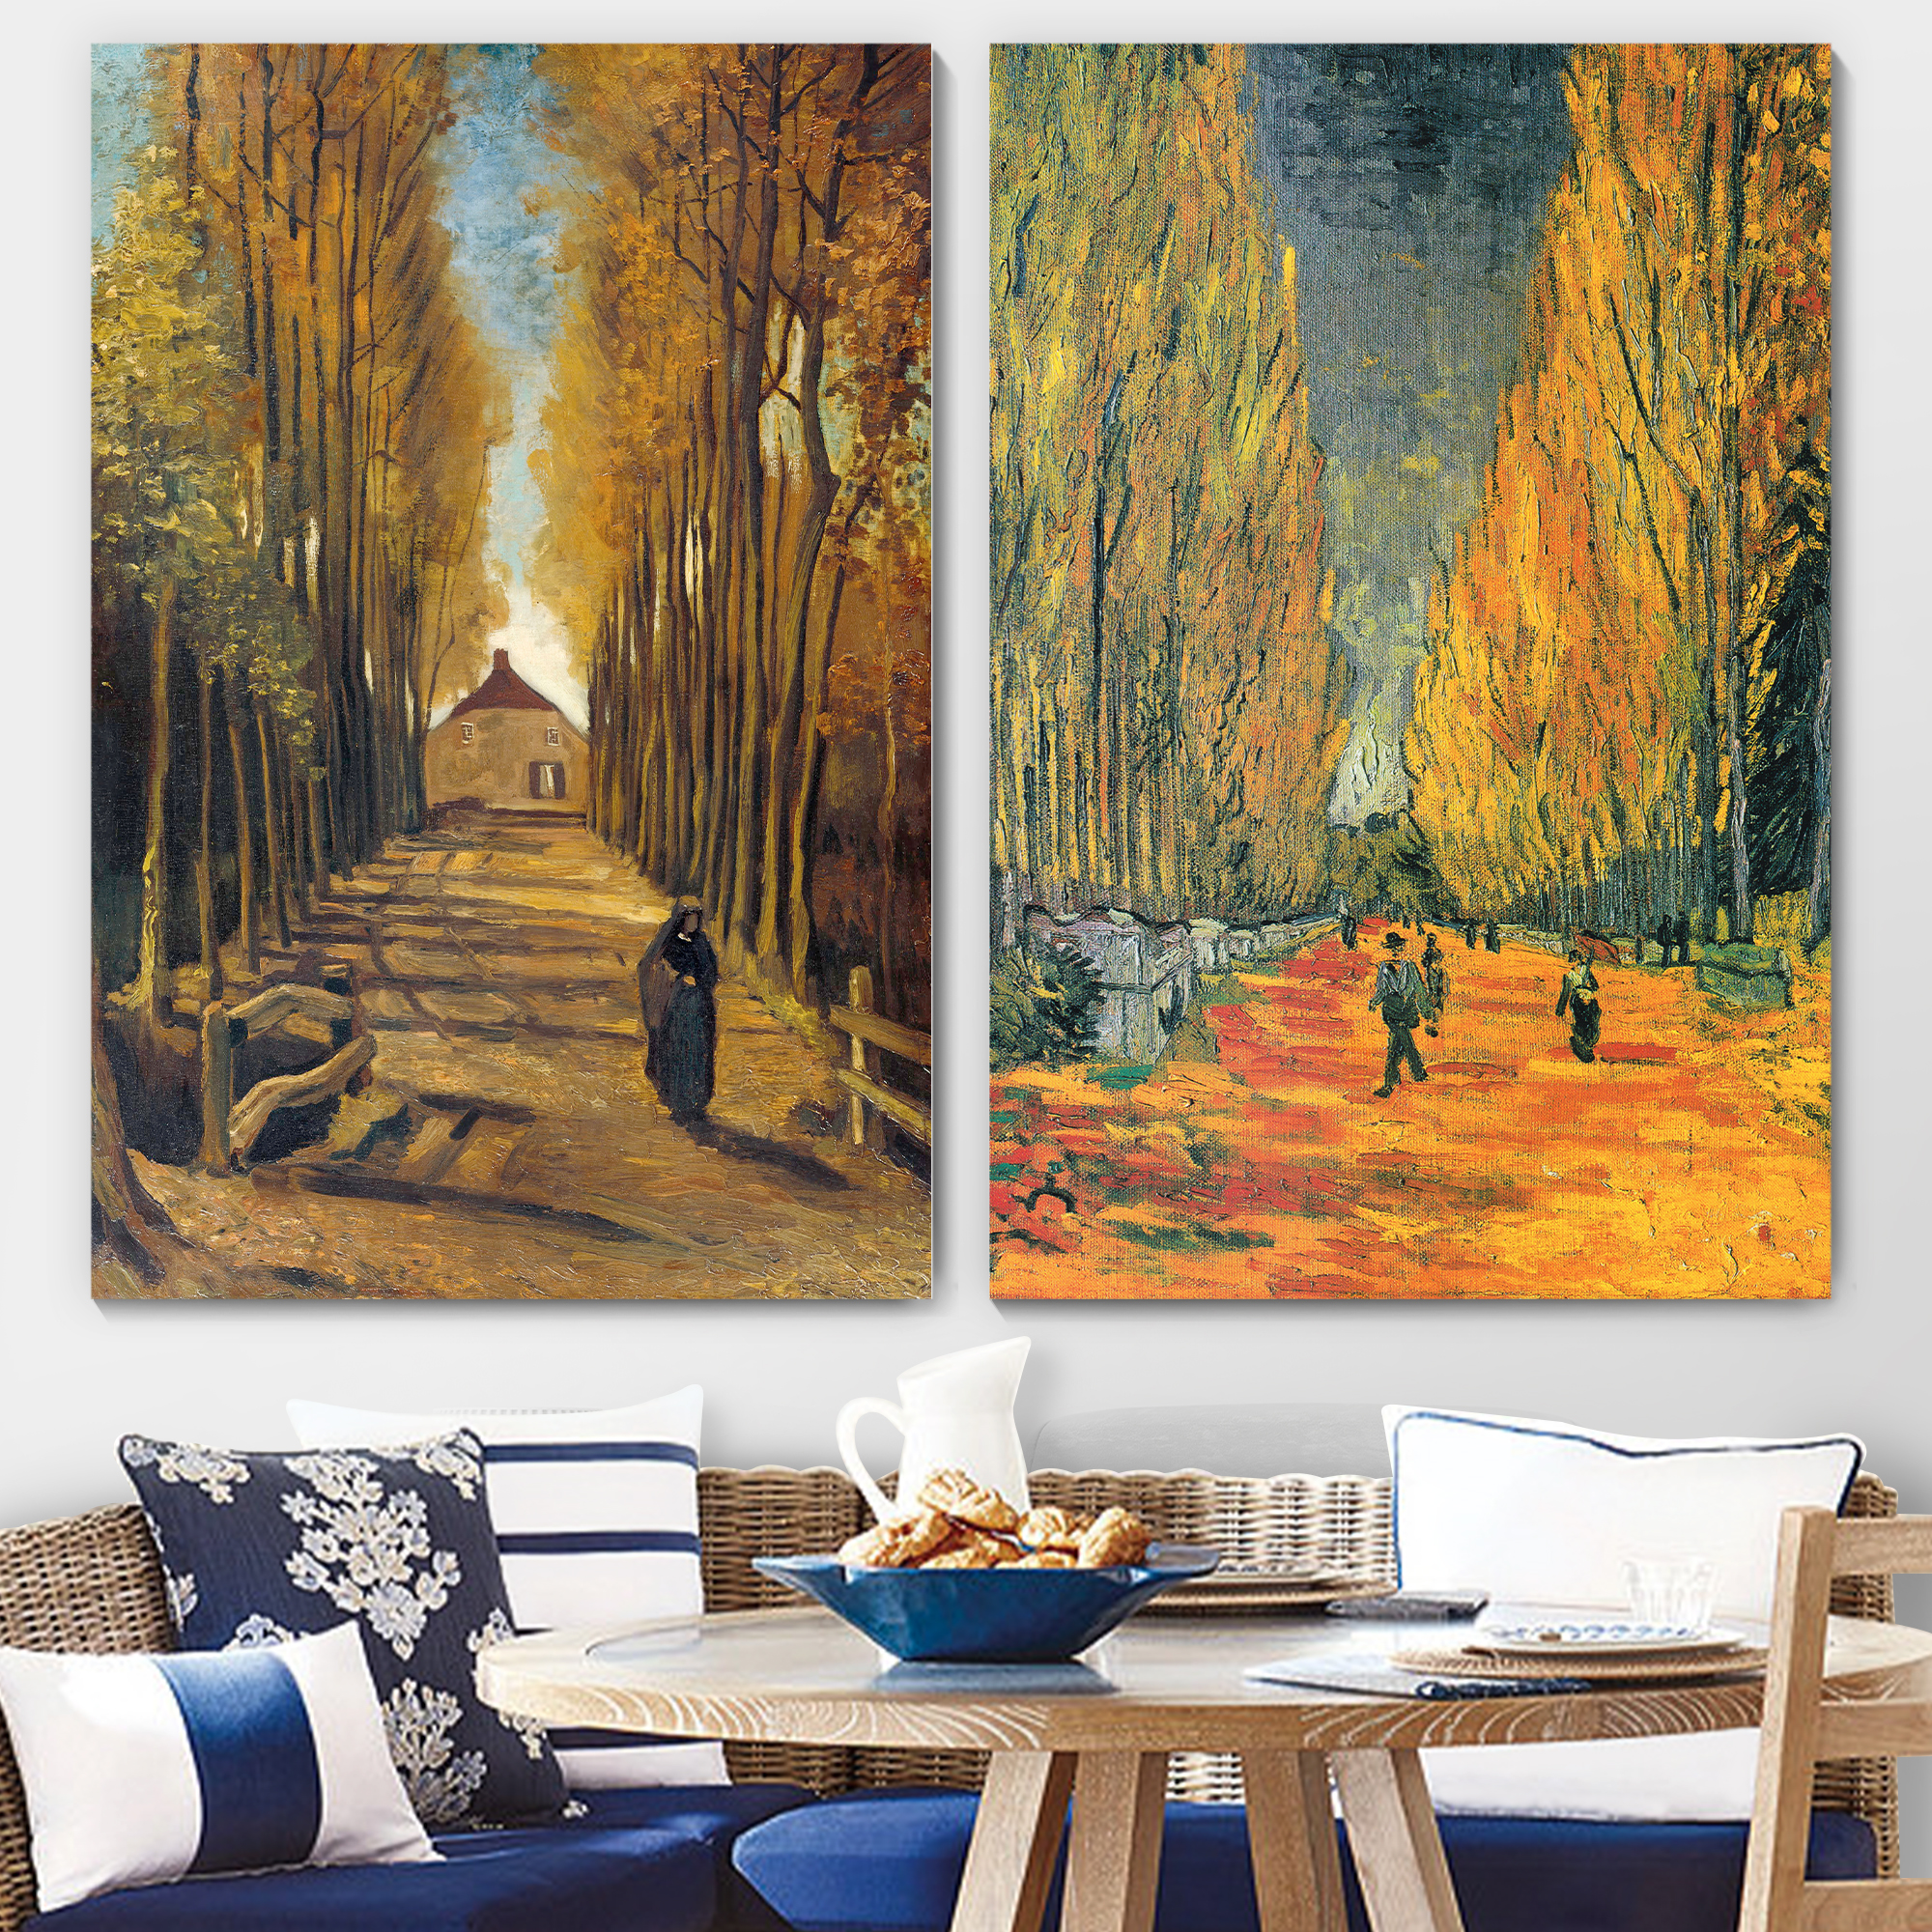 Wall26 - Les Alyscamps (Avenue in Arles) / Avenue of Poplars in Autumn by Vincent Van Gogh - Oil Painting Reproduction in Set of 2 | Canvas Prints Wall Art, Ready to Hang - 16